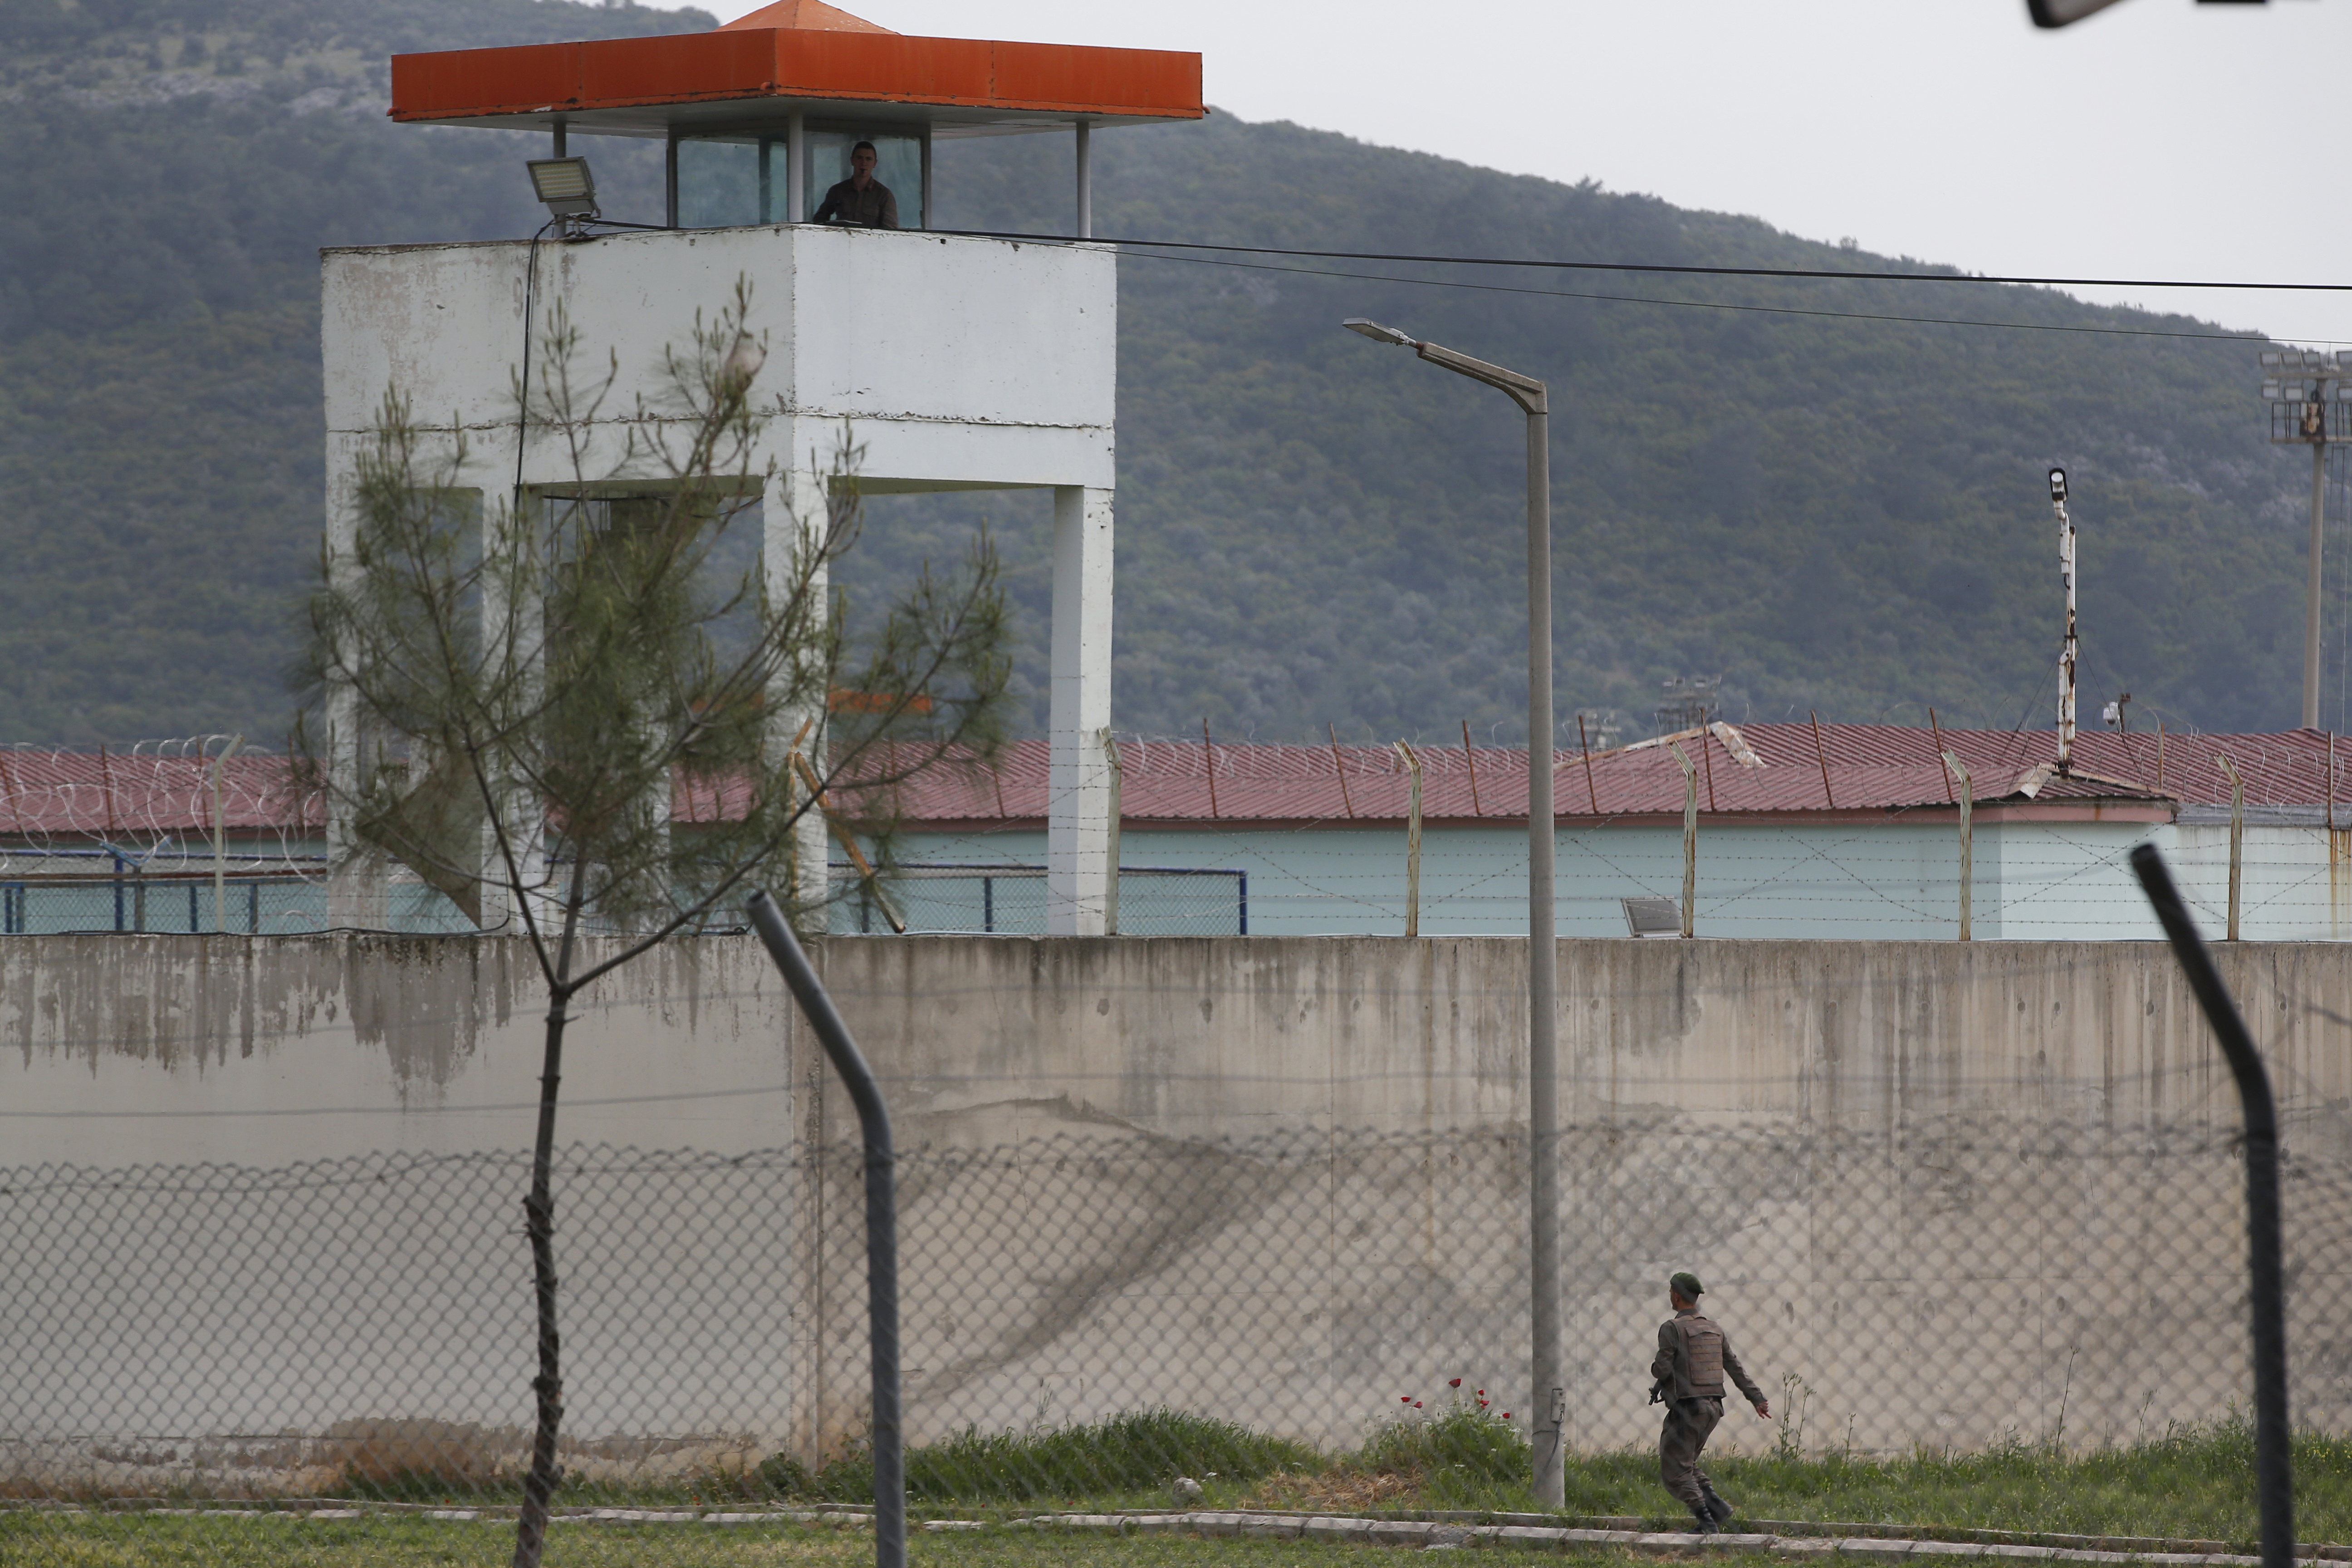 Exterior view of a prison in Turkey. A guard is on patrol.